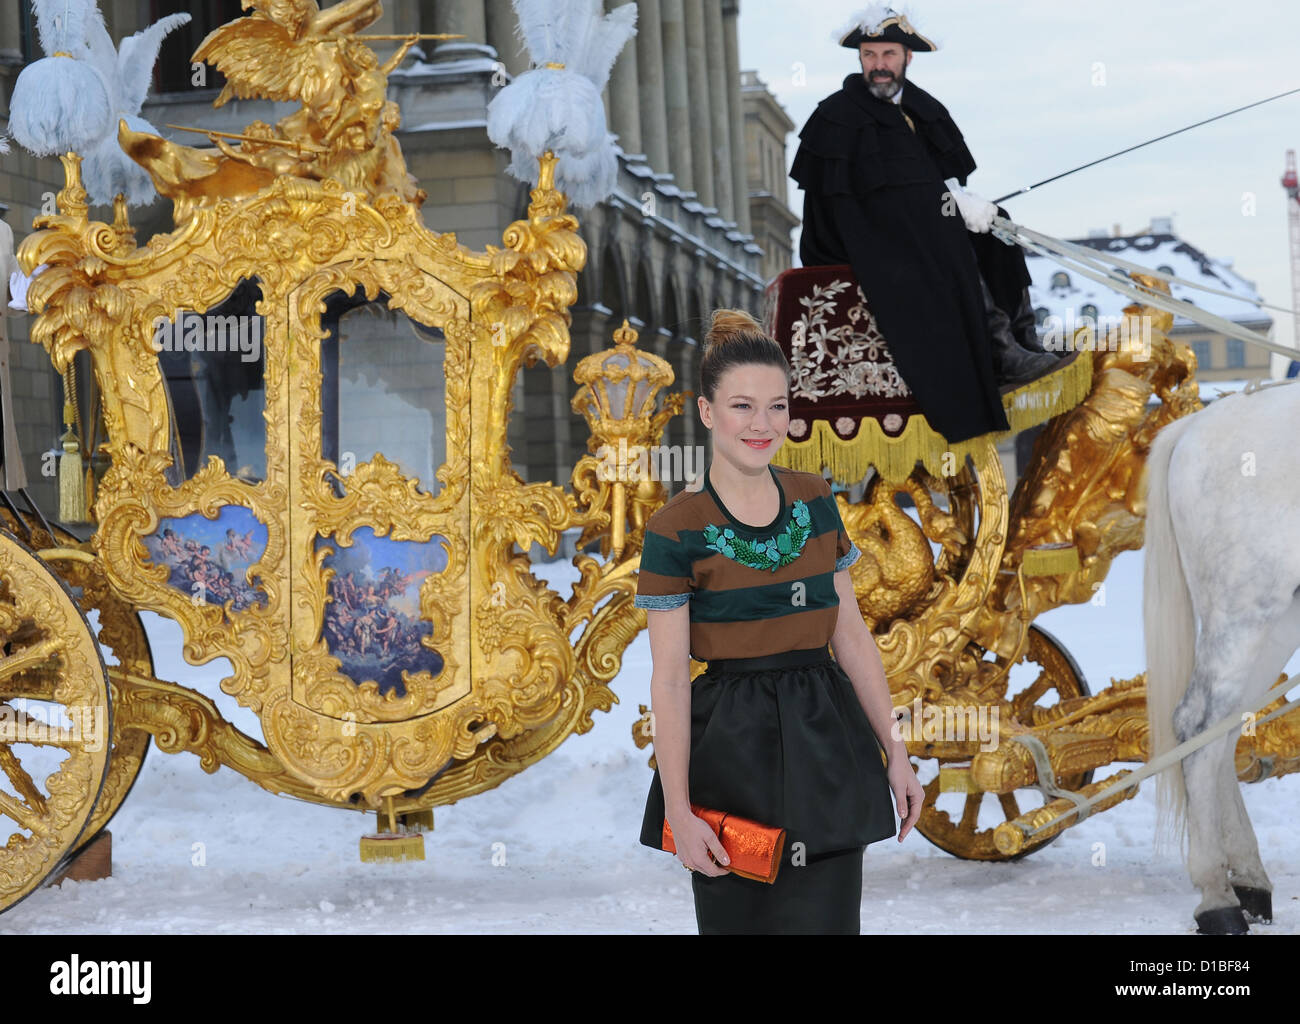 Lead actress Hannah Herzsprung (Elisabeth, Empress of Austria) stands in front of the golden coach from the movie for the premiere of the historical film 'Ludwig II' in the Hofgarten in Munich, Germany, 13 December 2012. The movie comes to cinemas on 26 December 2012 in Germany. Photo: URSULA DUEREN Stock Photo